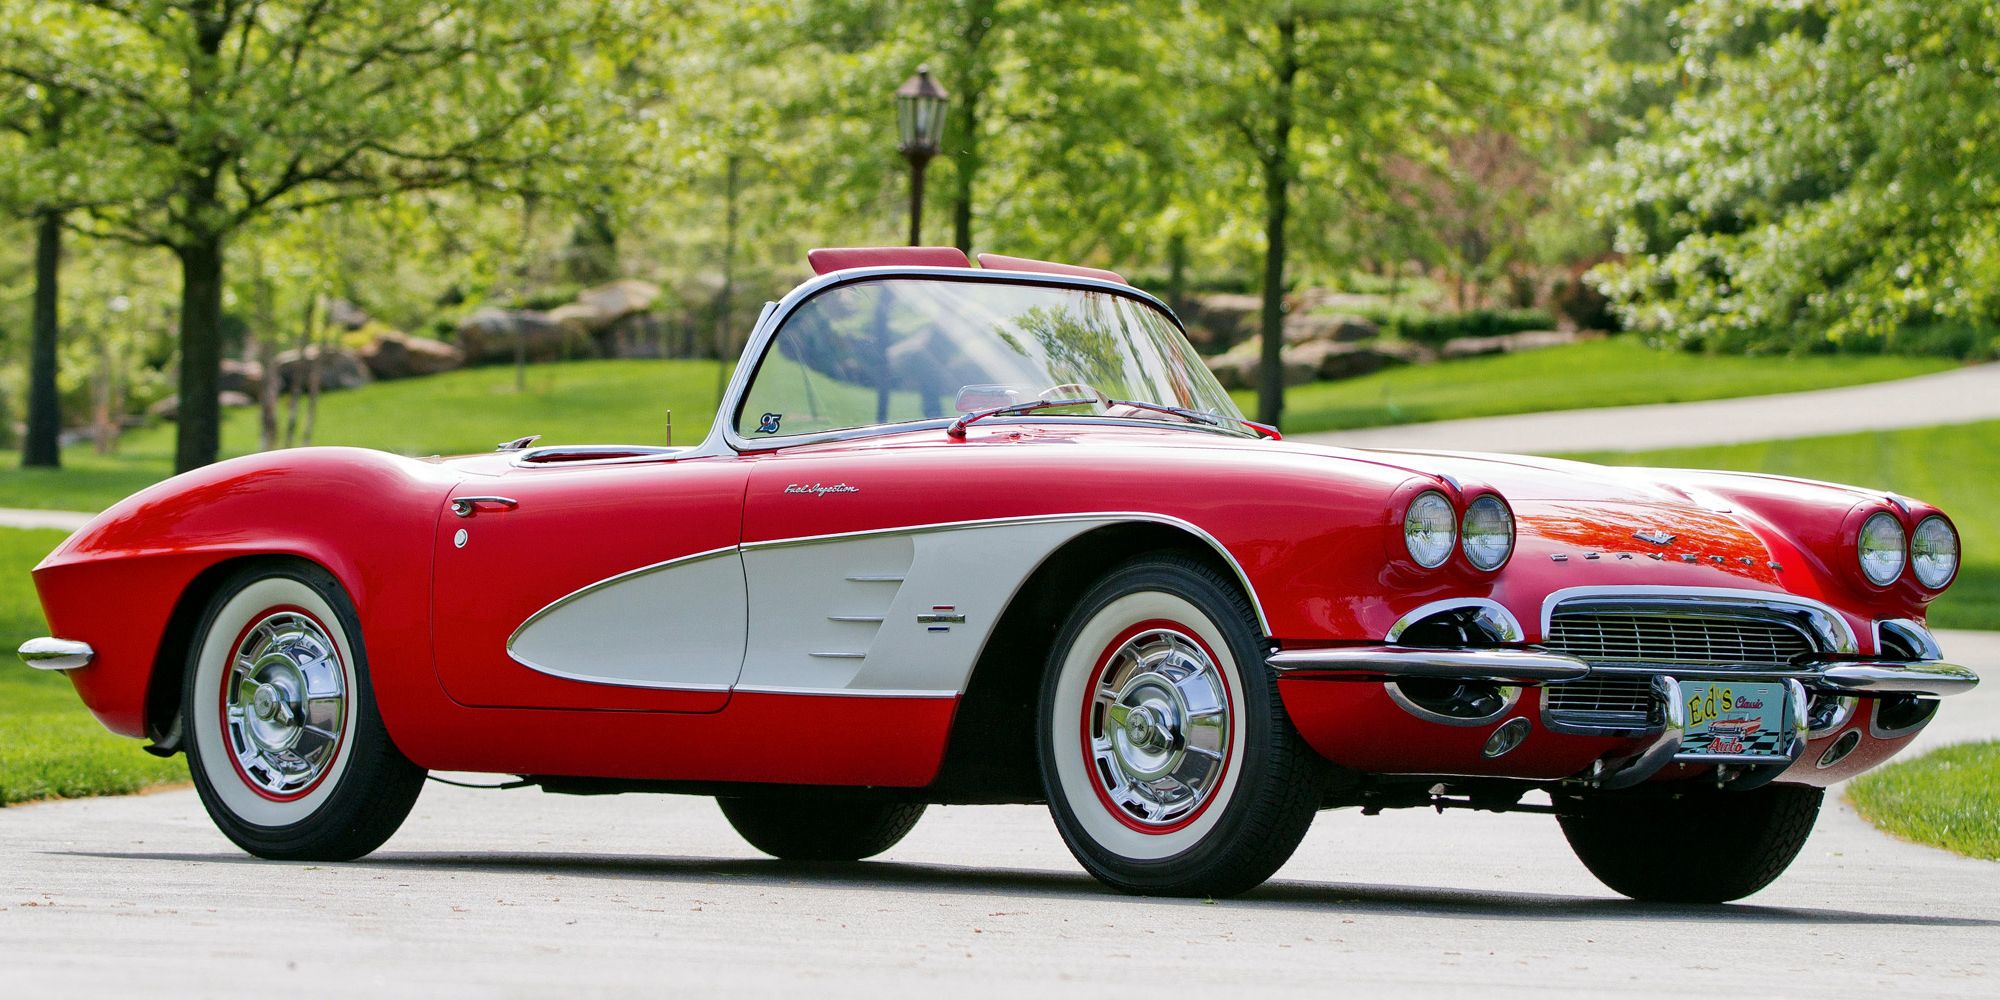 The front of a later C1 Corvette